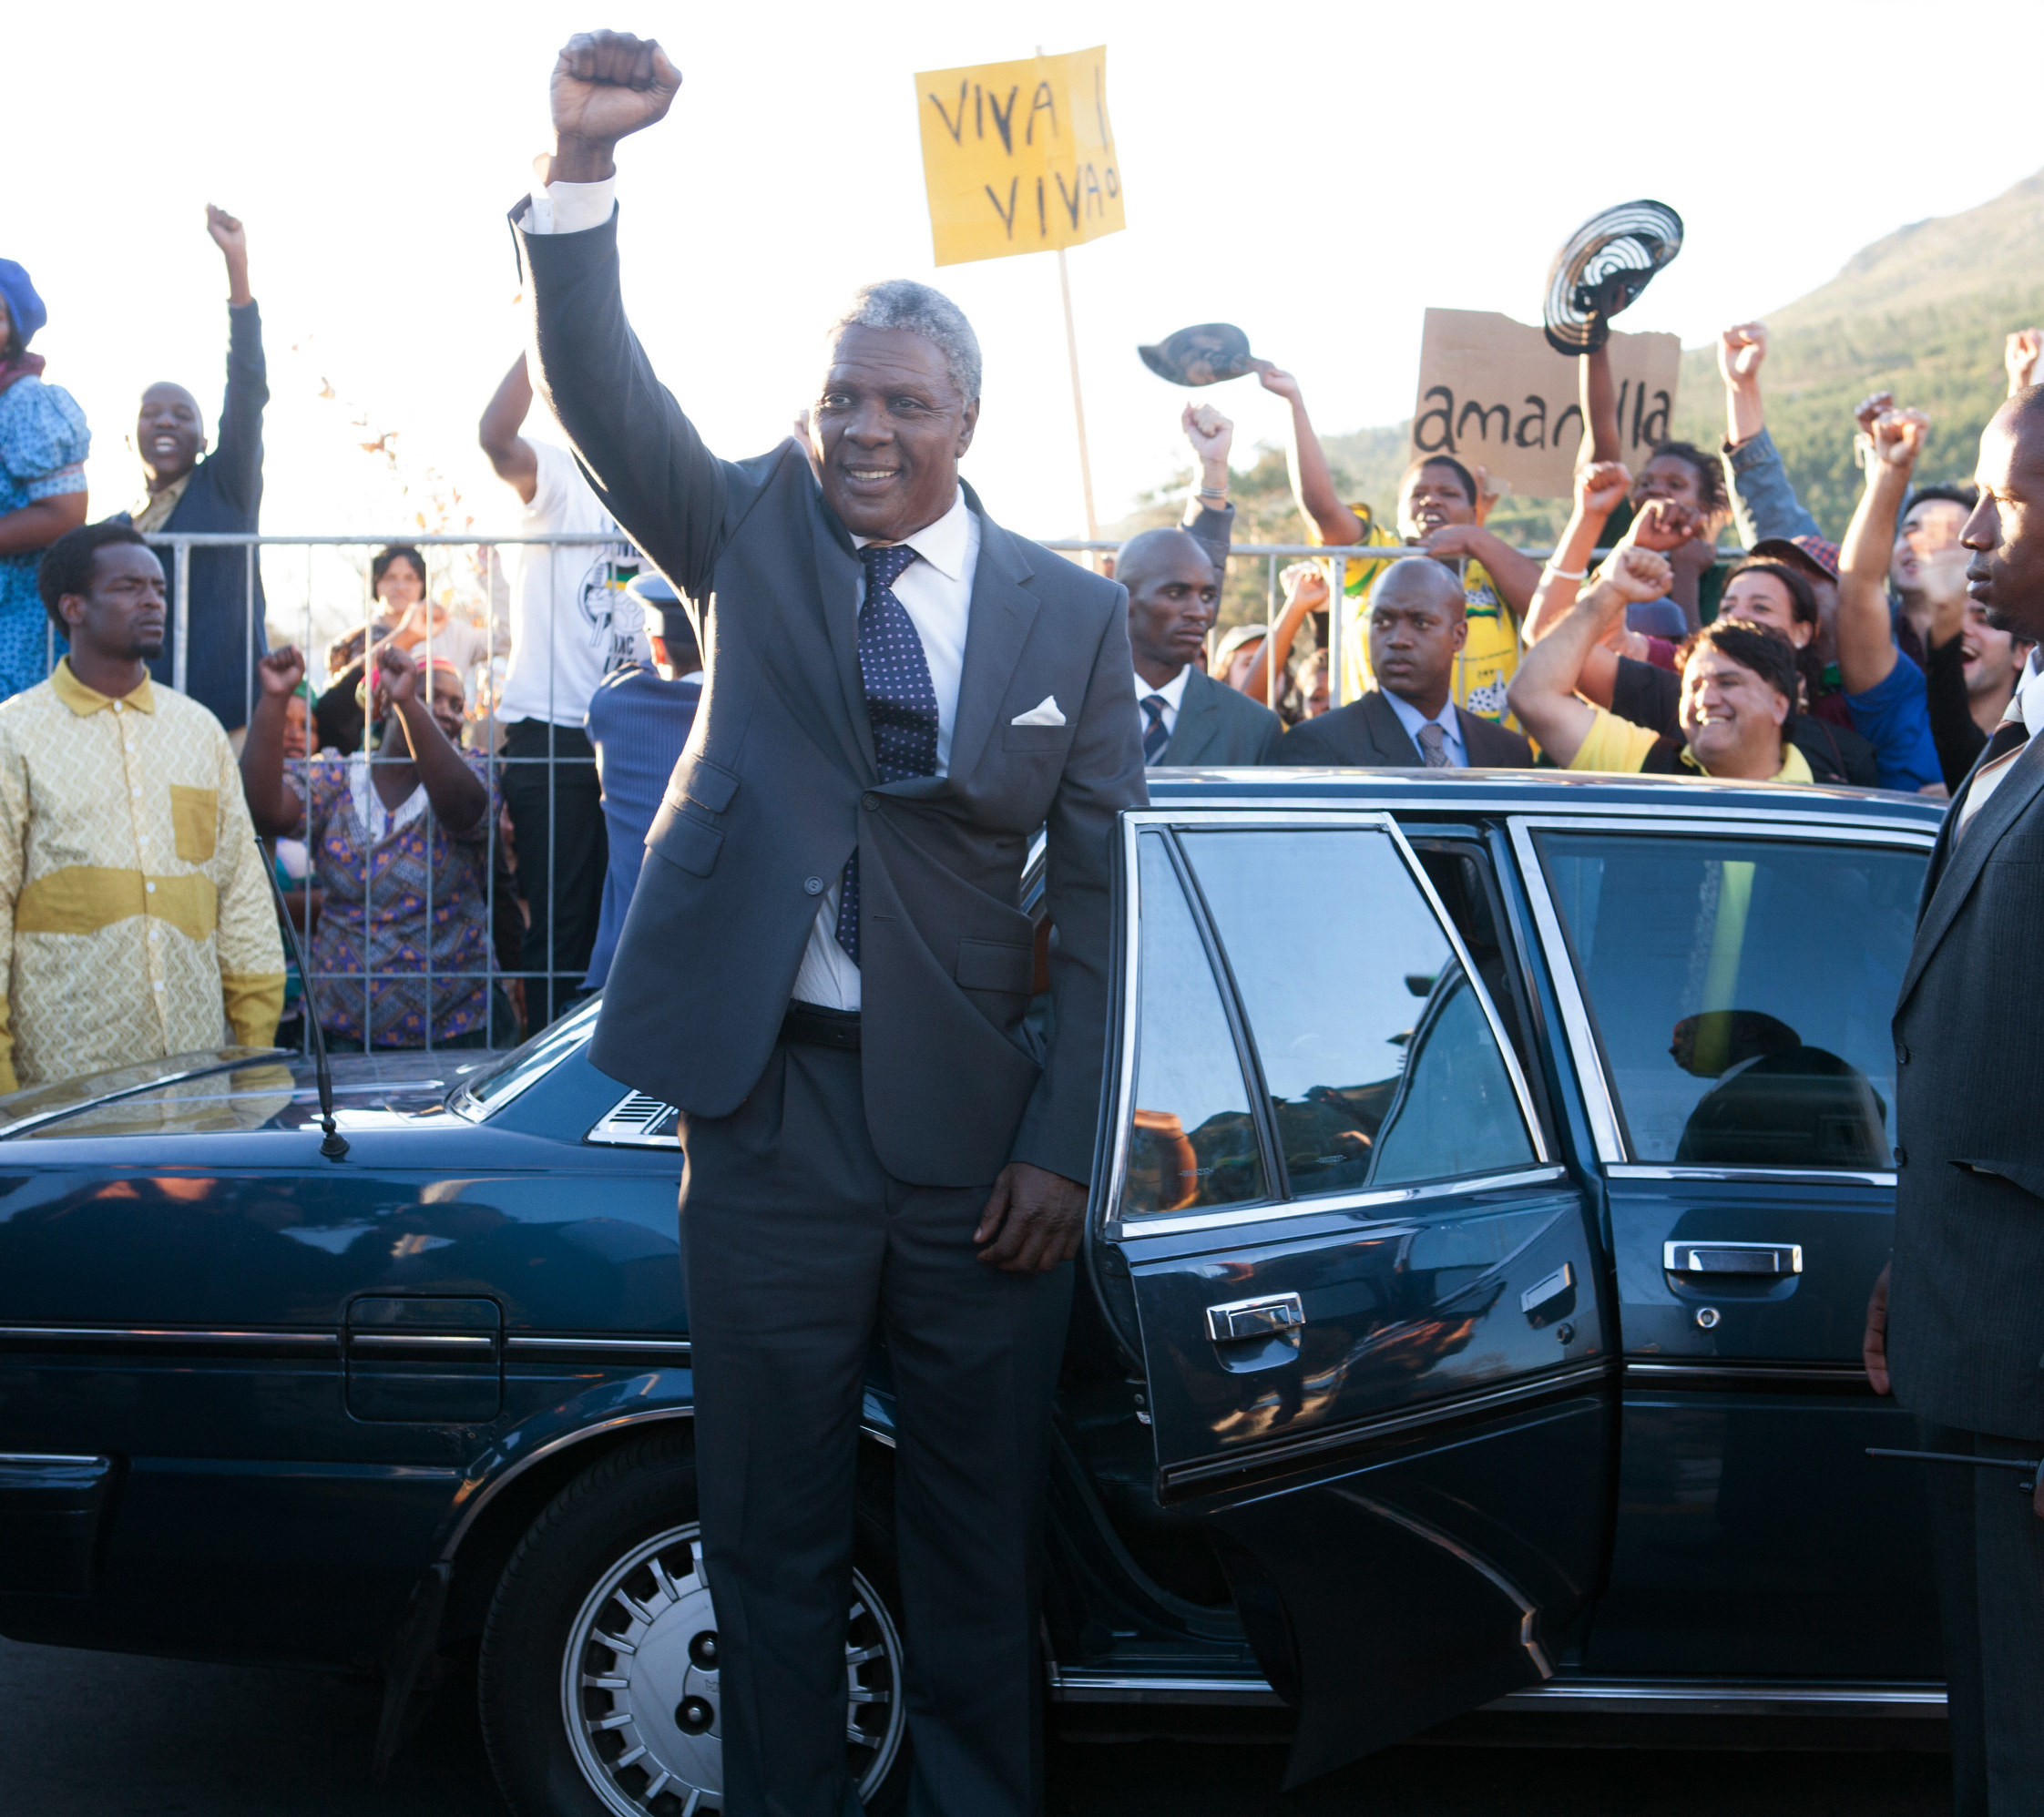 Elba raising his fist as he gets out of a car with a crowd of people behind him